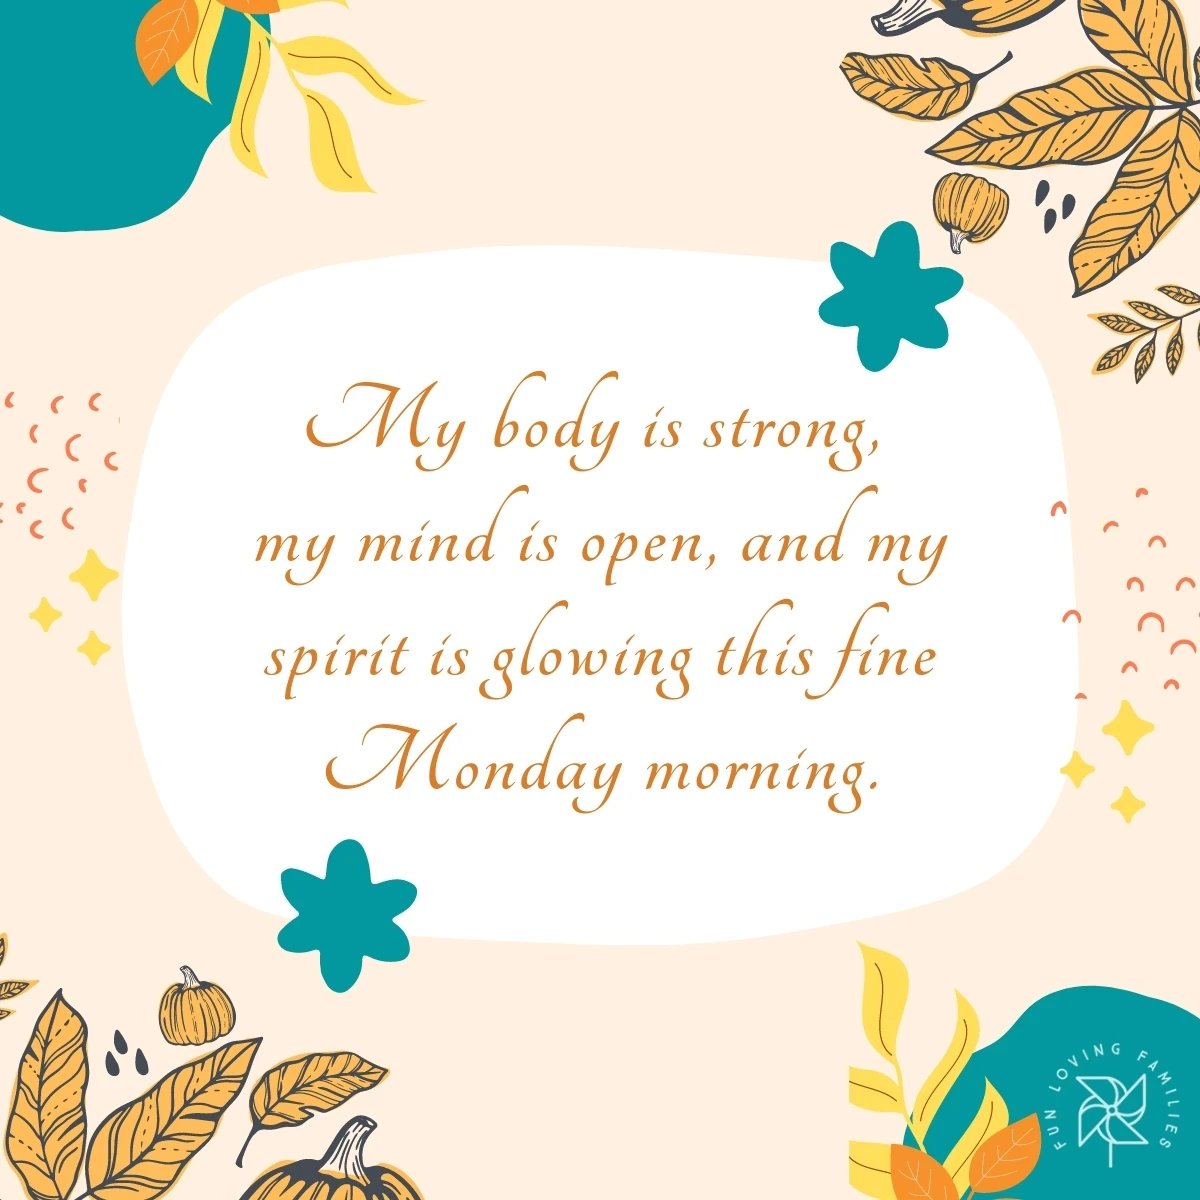 My body is strong, my mind is open affirmation image